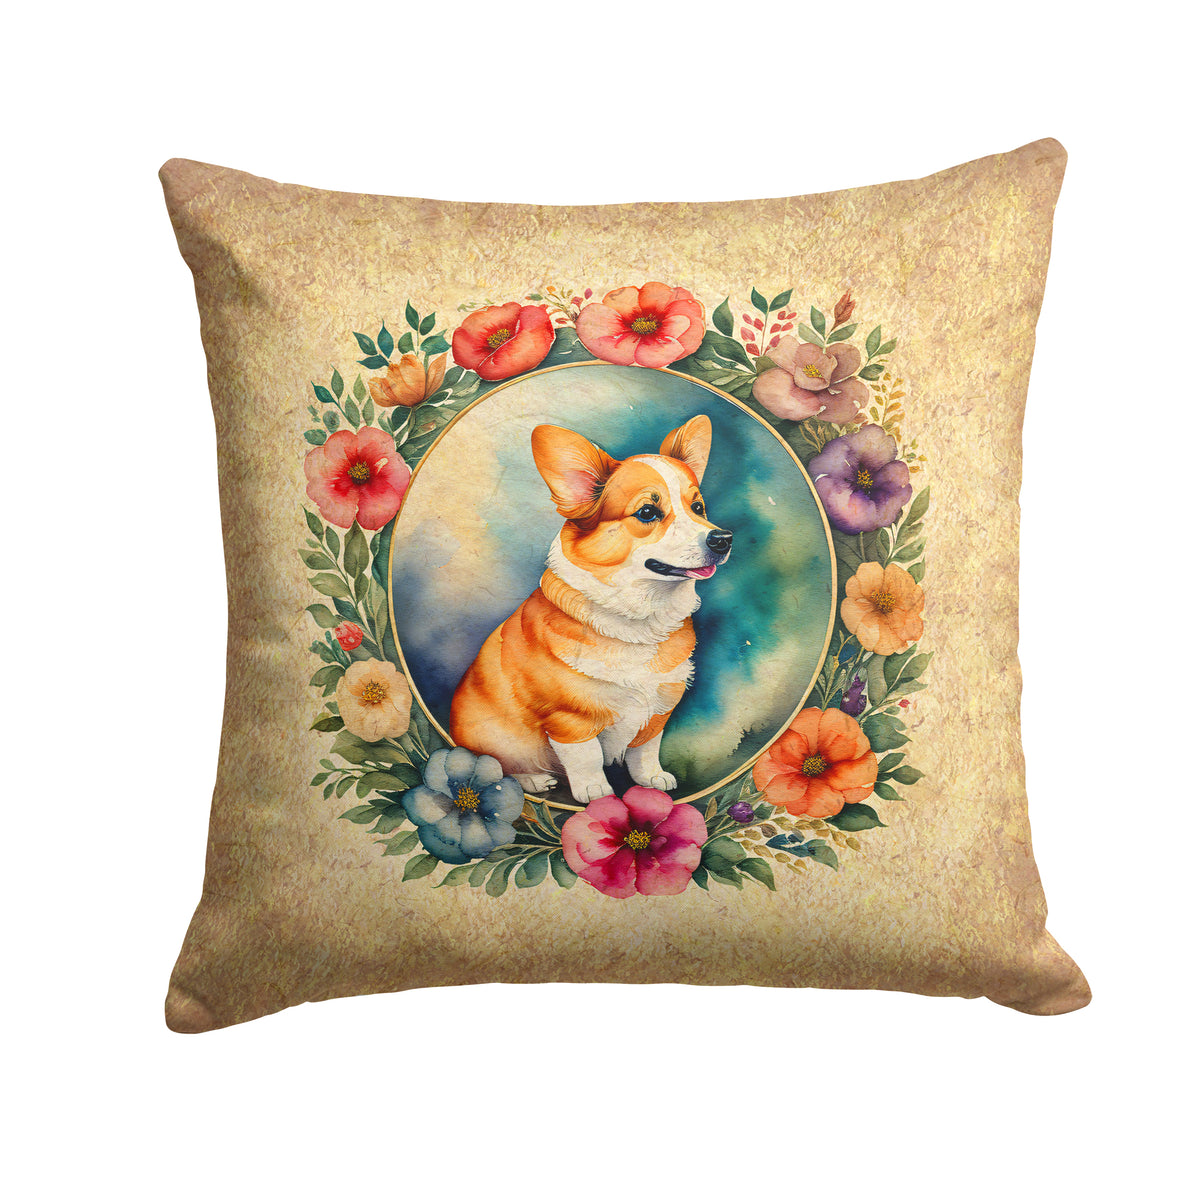 Buy this Corgi and Flowers Fabric Decorative Pillow